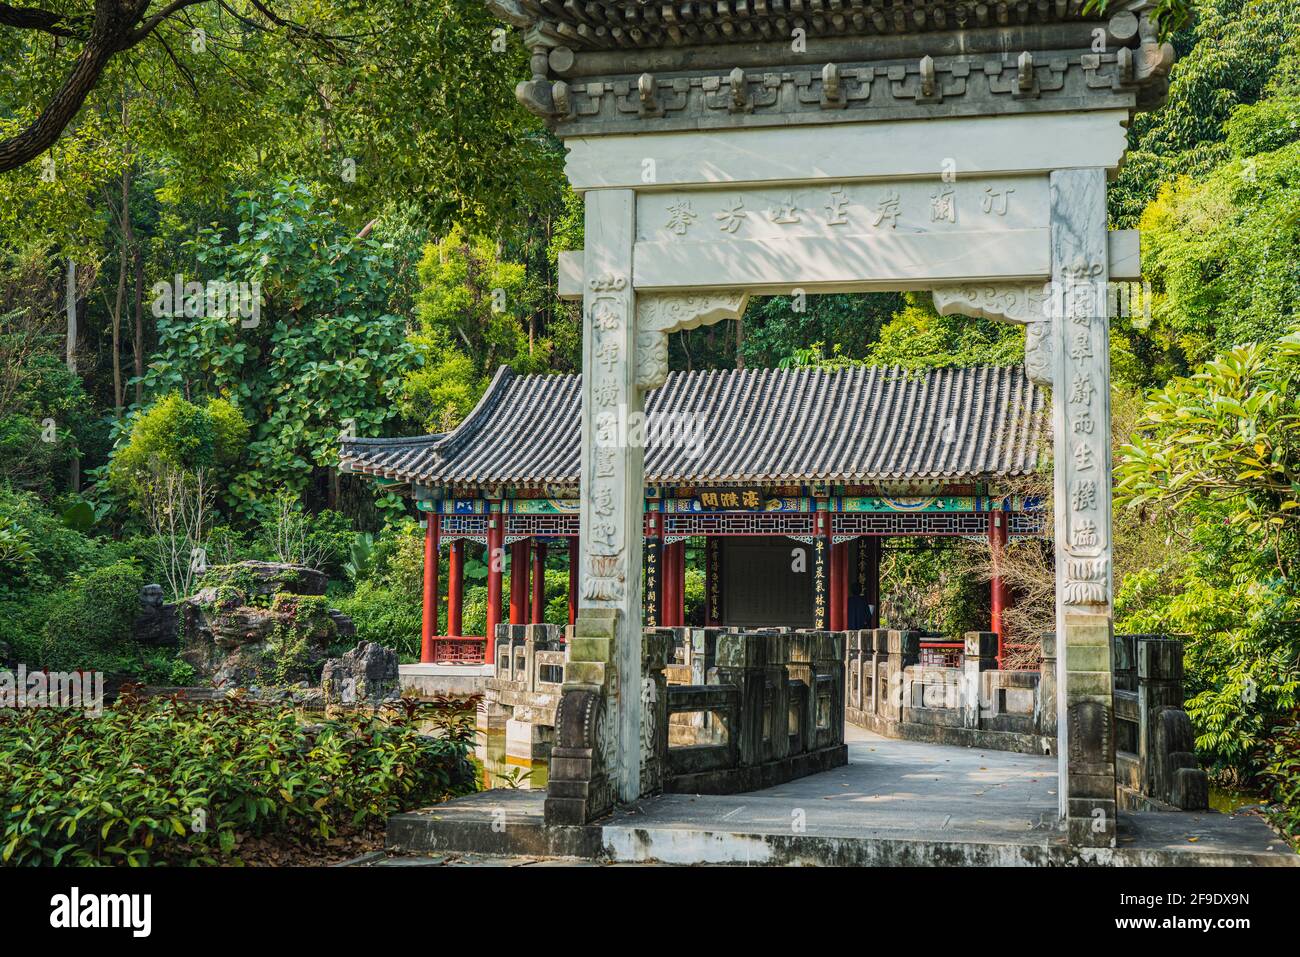 Shenzhen, China. October, 2019. The pavilion and troii at Zhile Garden in Shenzhen International Garden and Flower Expo Park. The park serves multiple Stock Photo